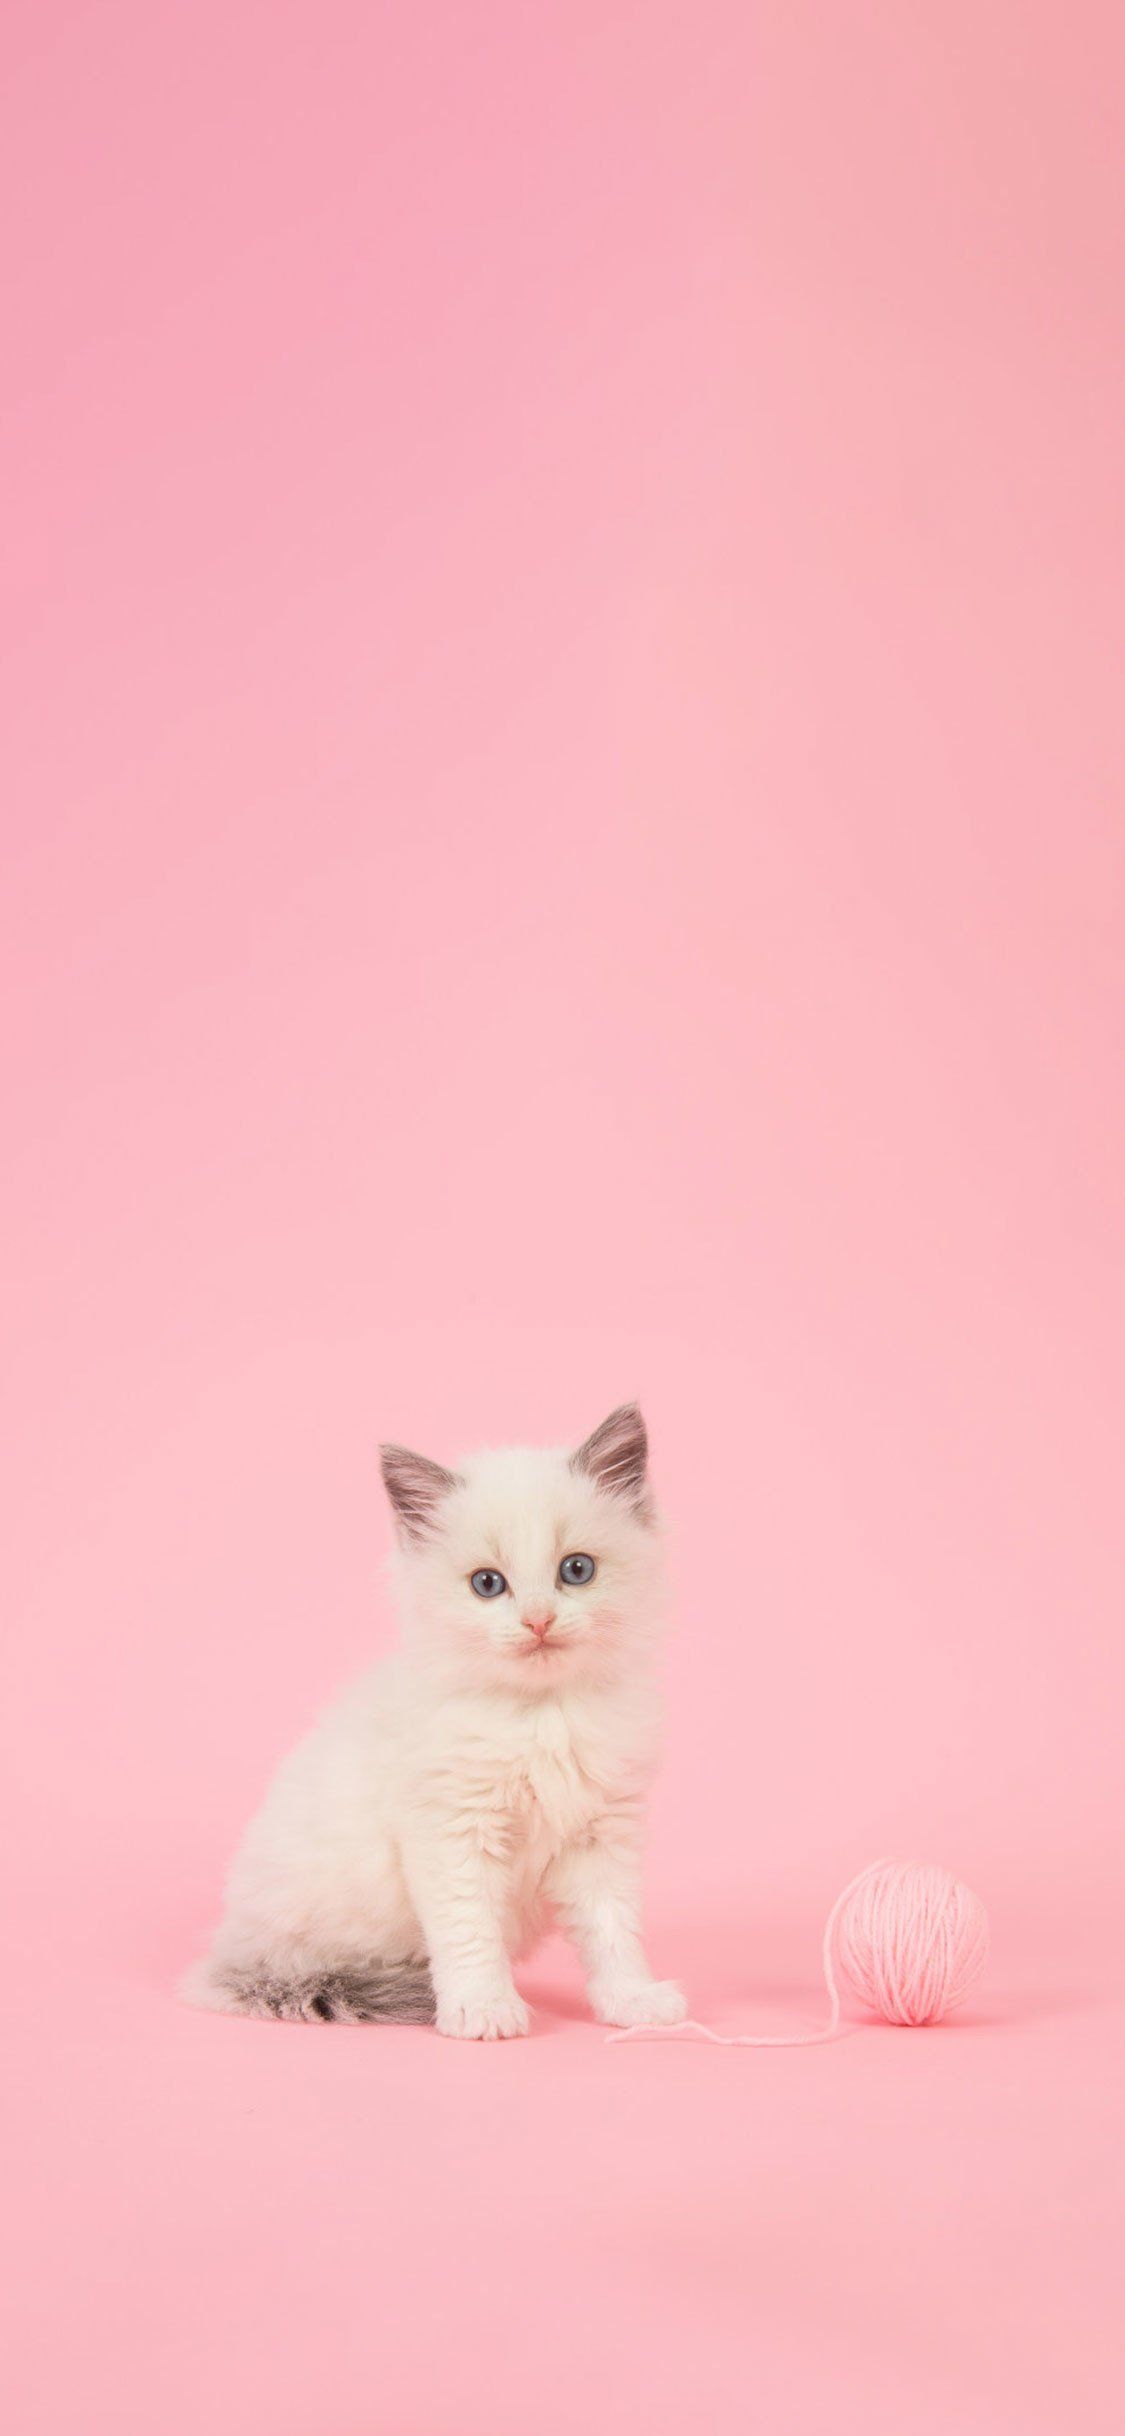 10 Outstanding pink aesthetic wallpaper cat You Can Download It For ...